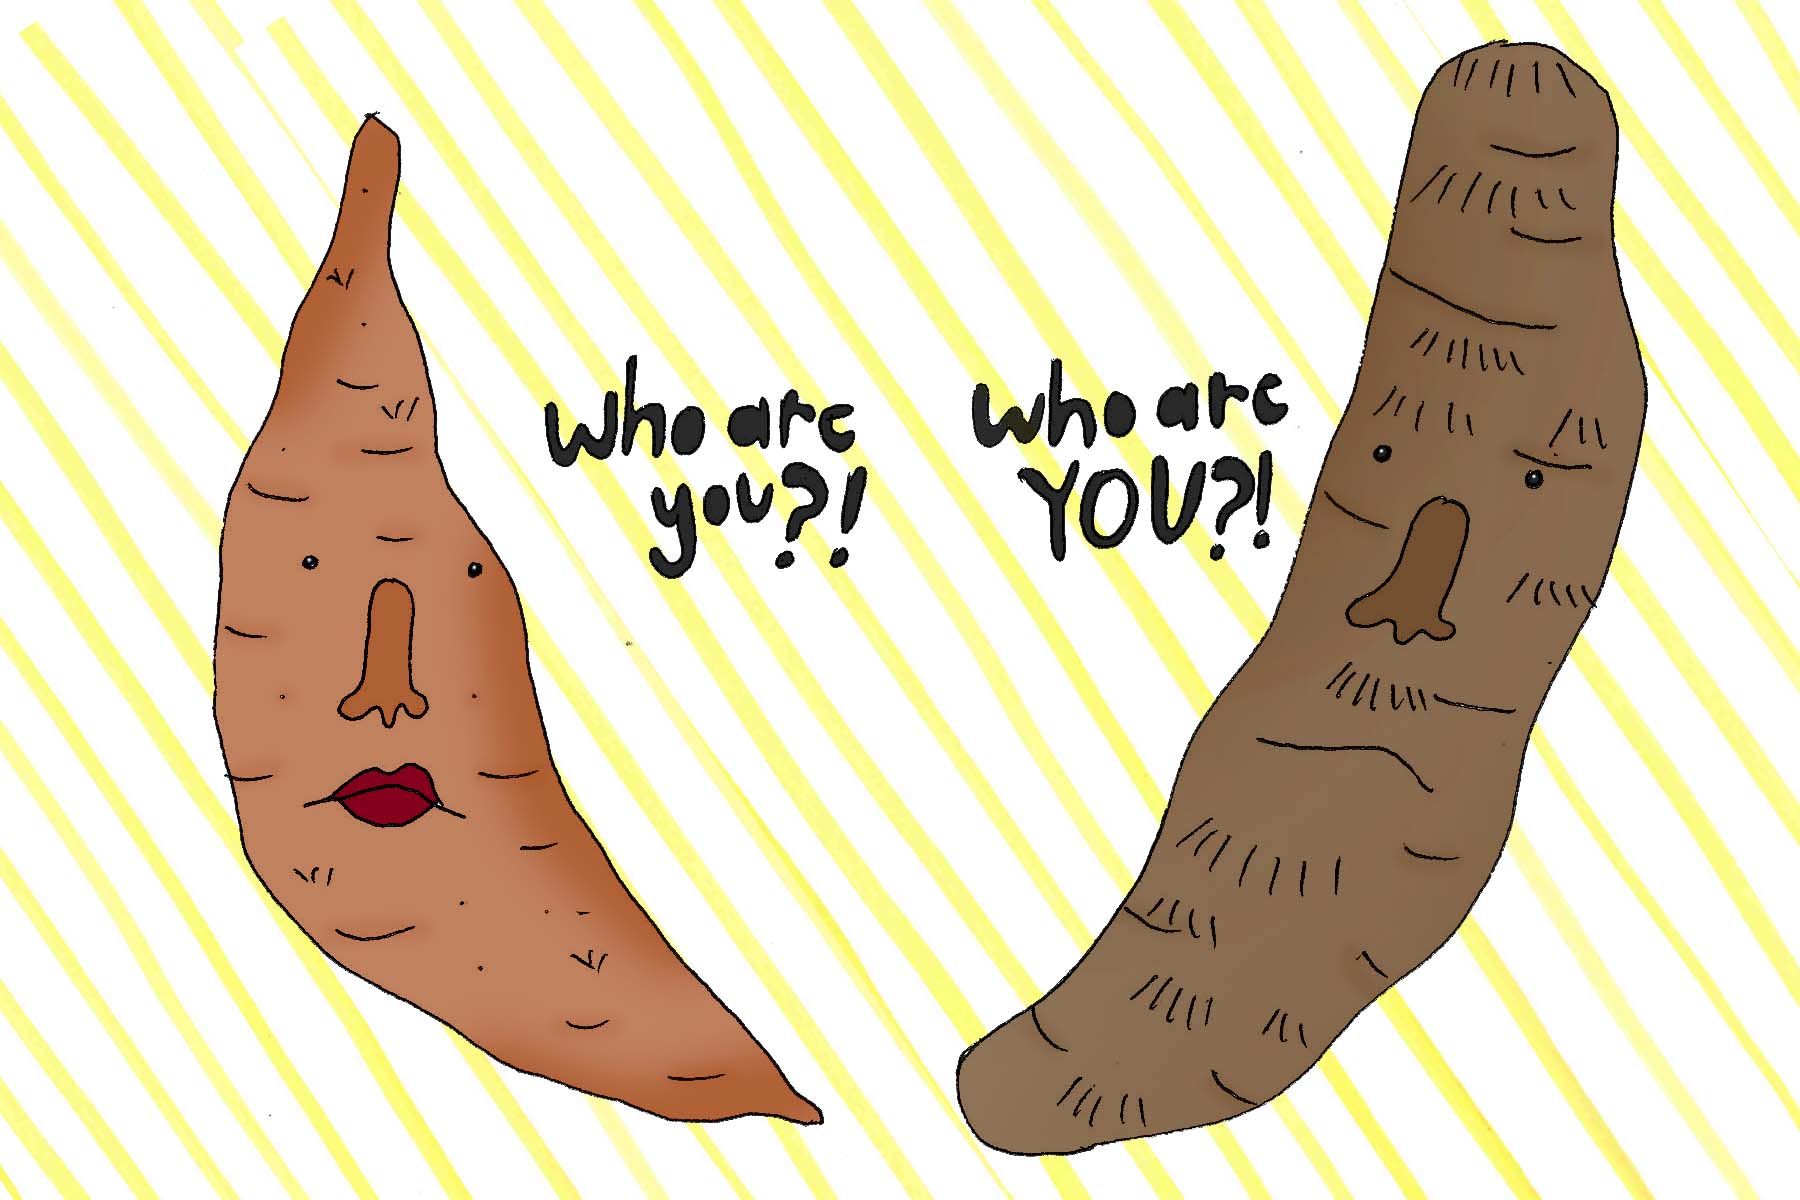 The meeting between a Sweet potato and a true yam.